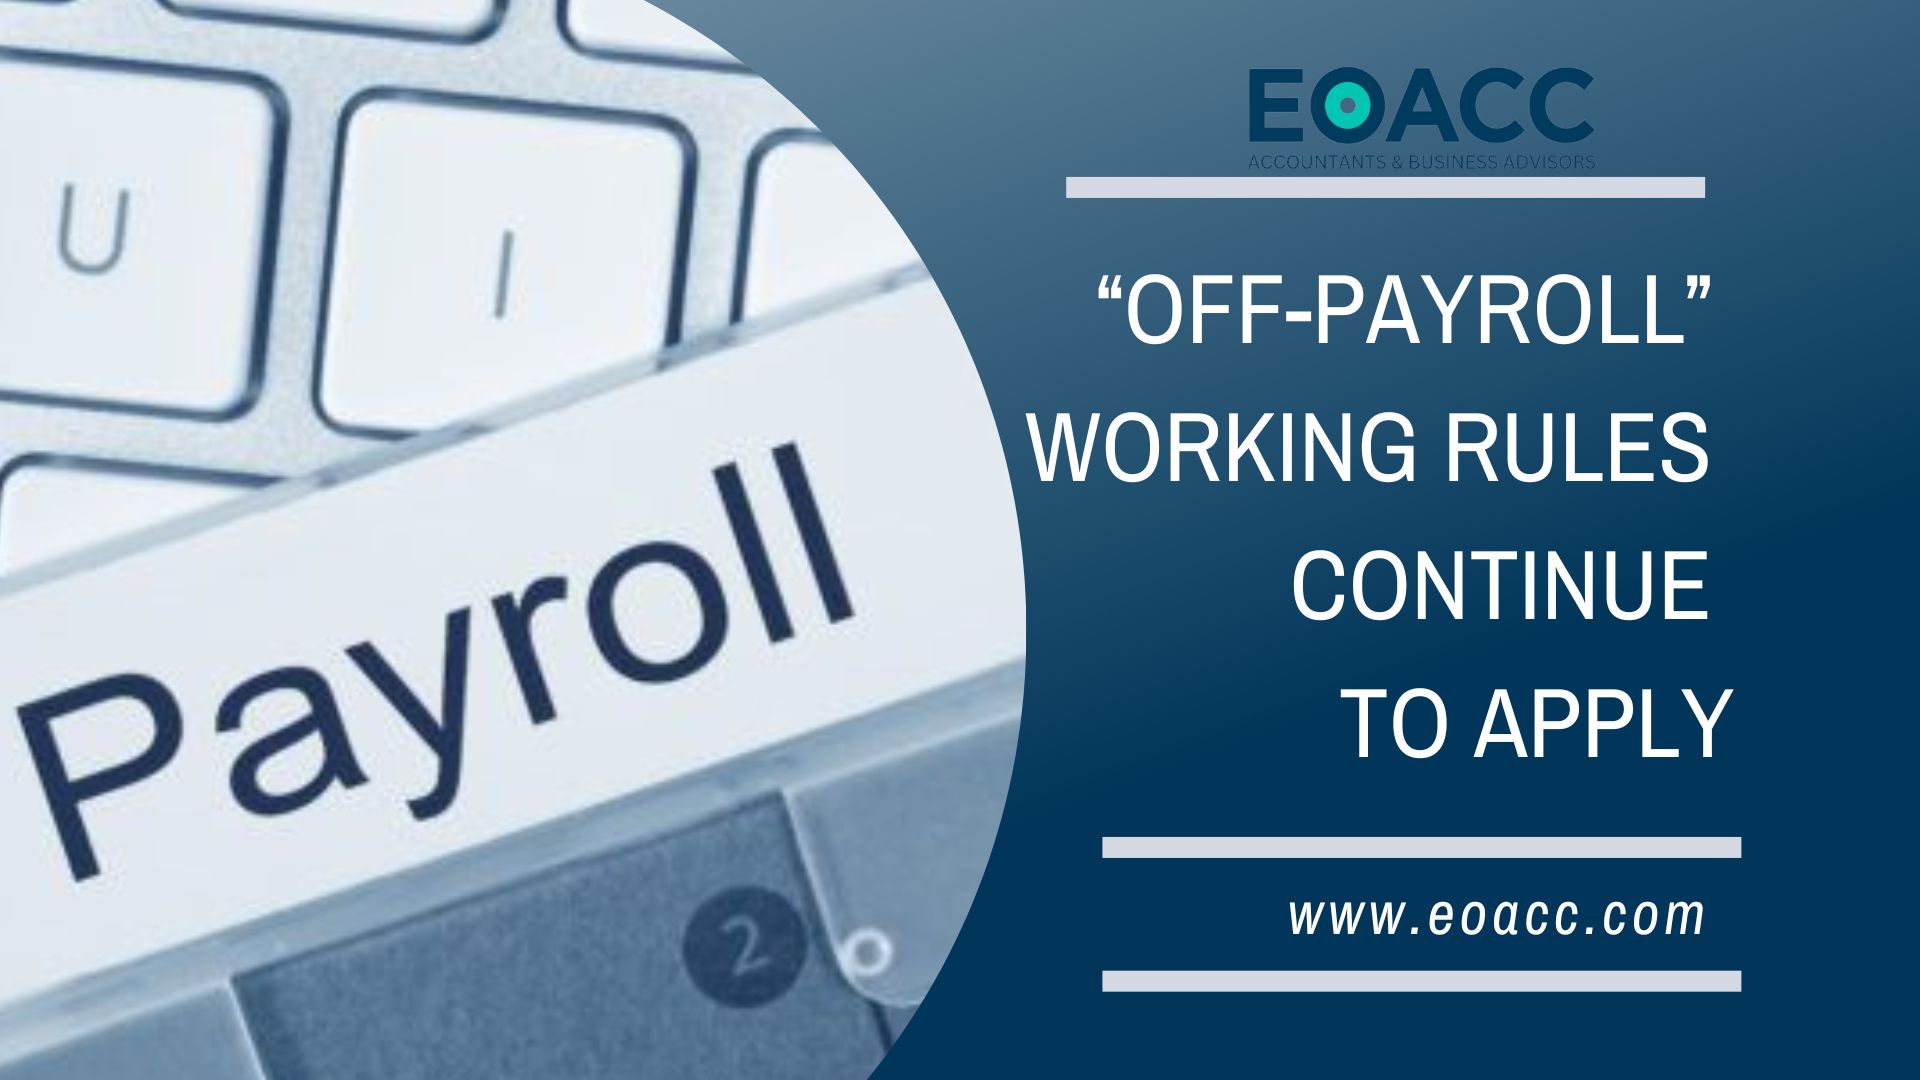 “OFF-PAYROLL” WORKING RULES CONTINUE TO APPLY